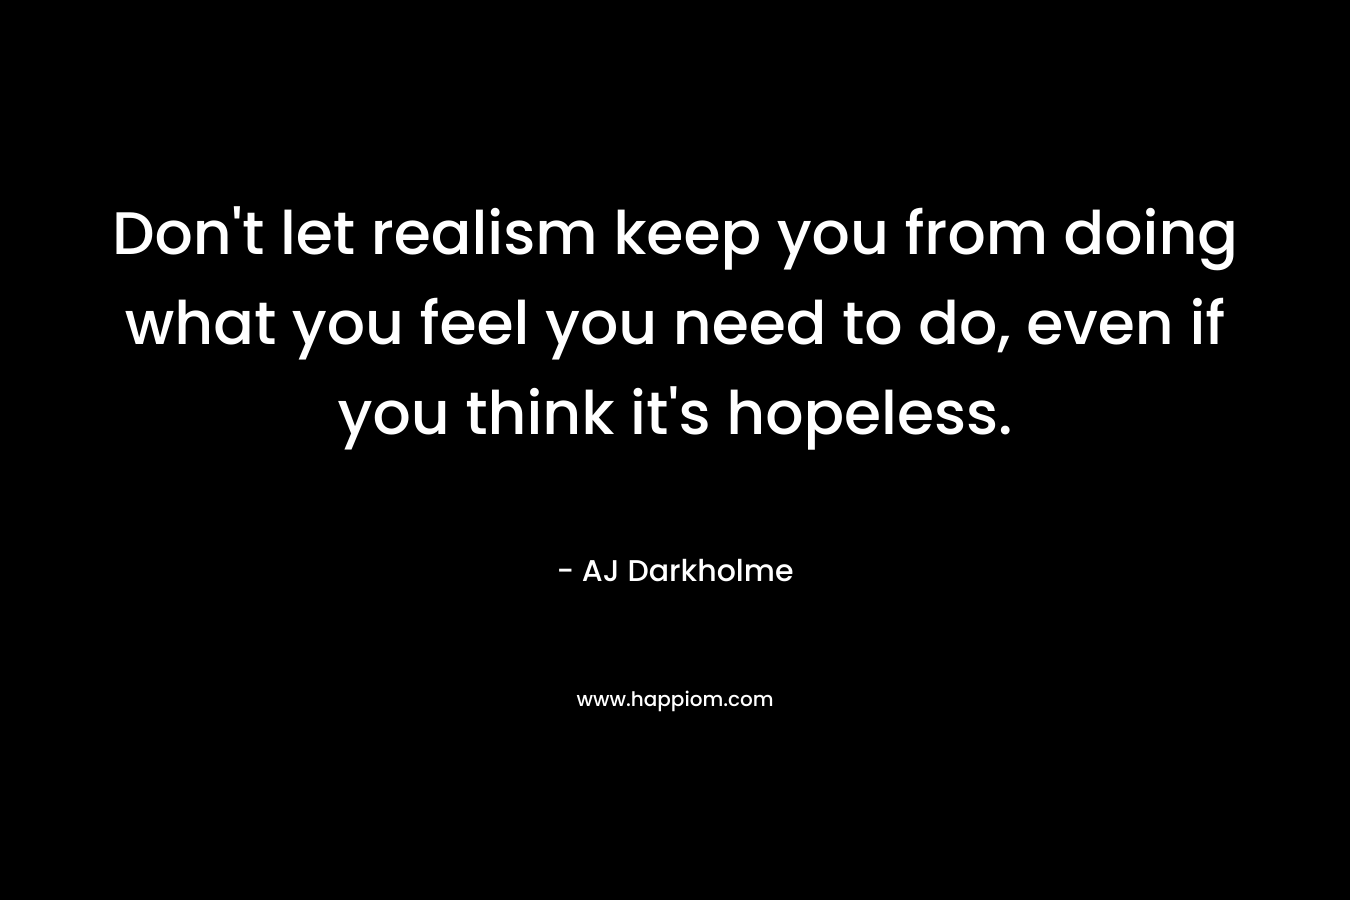 Don’t let realism keep you from doing what you feel you need to do, even if you think it’s hopeless. – AJ Darkholme